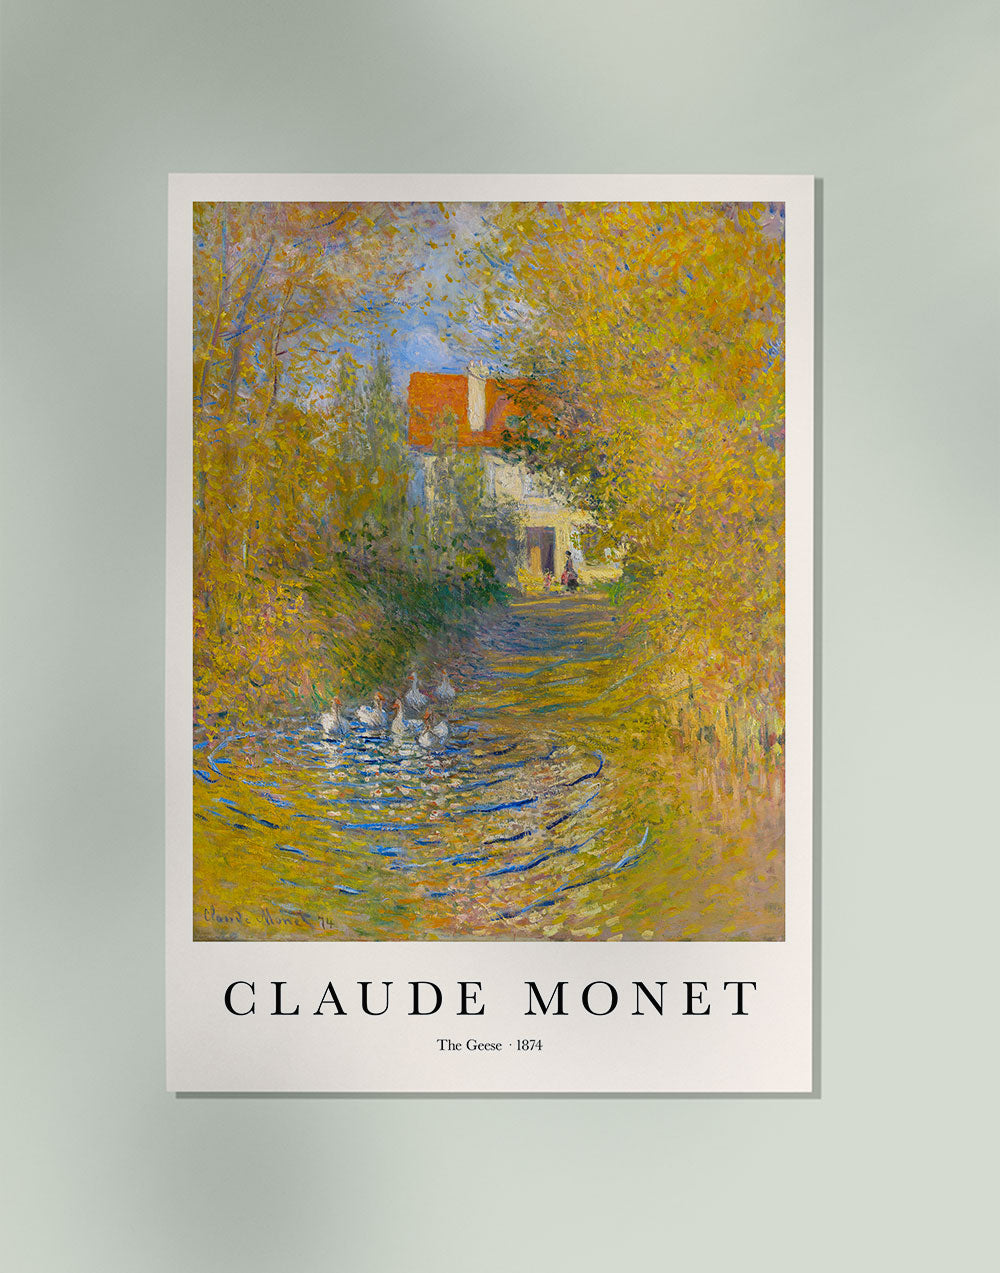 The Geese by Claude Monet Art Exhibition Poster